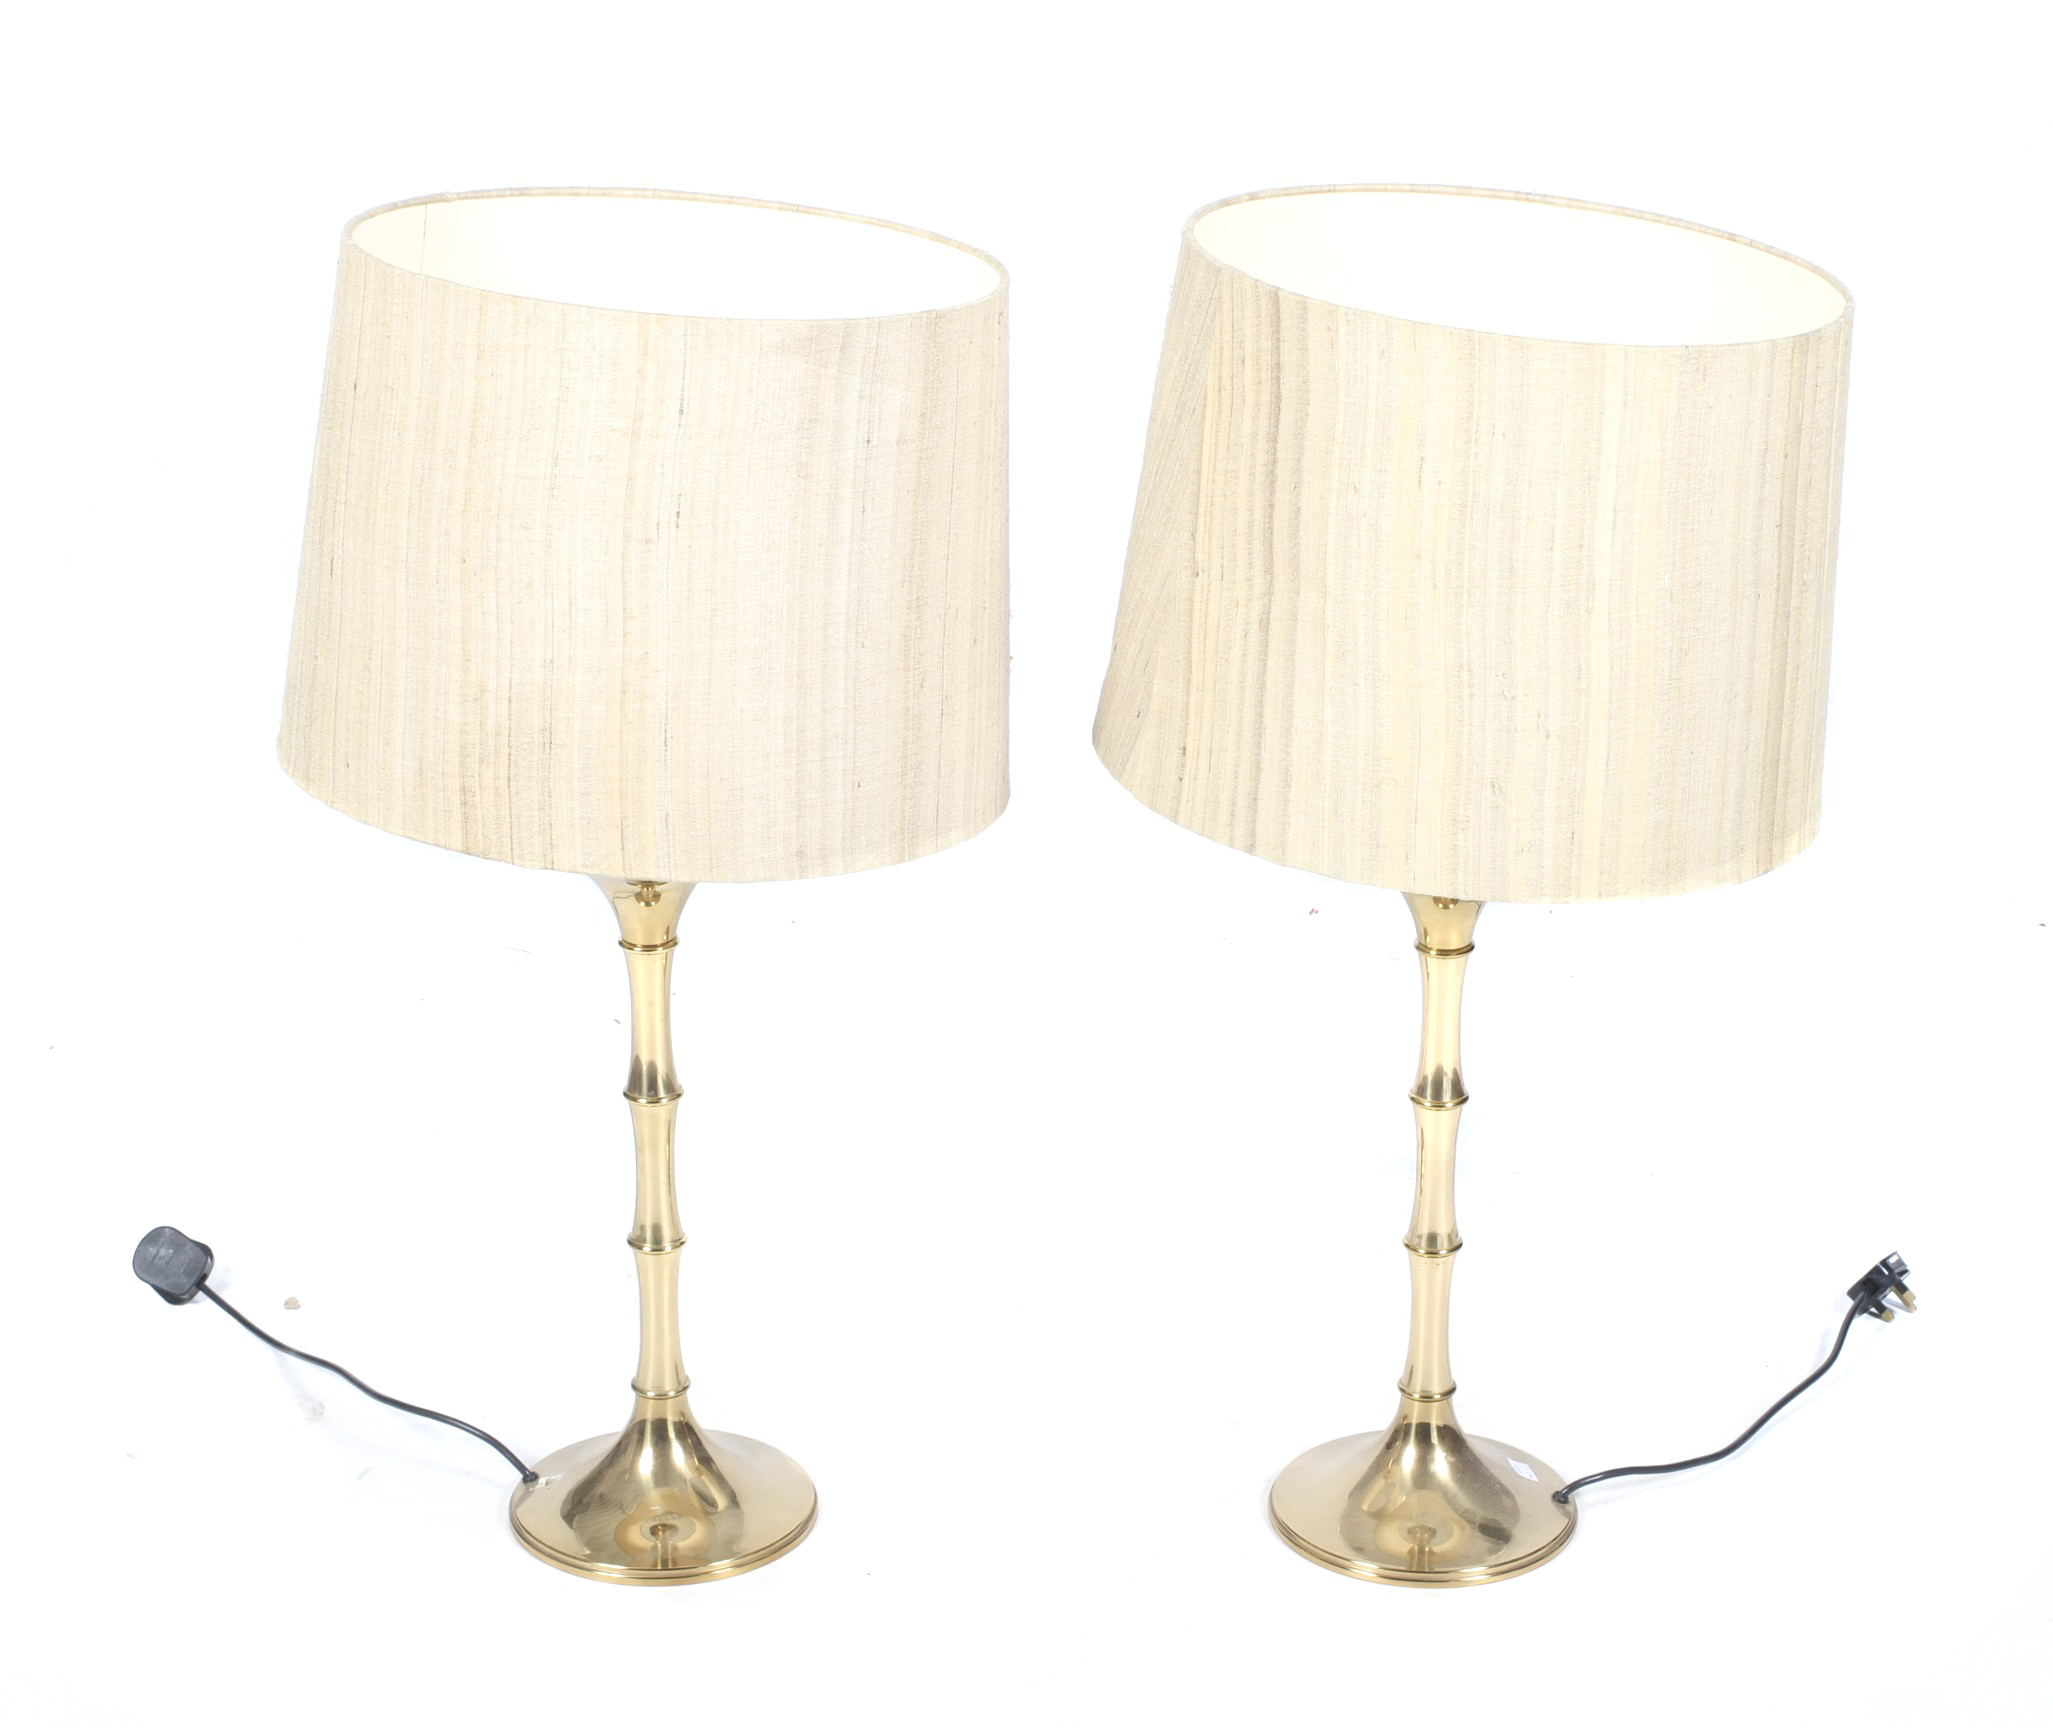 A pair of Ingo Maurer table lamps.